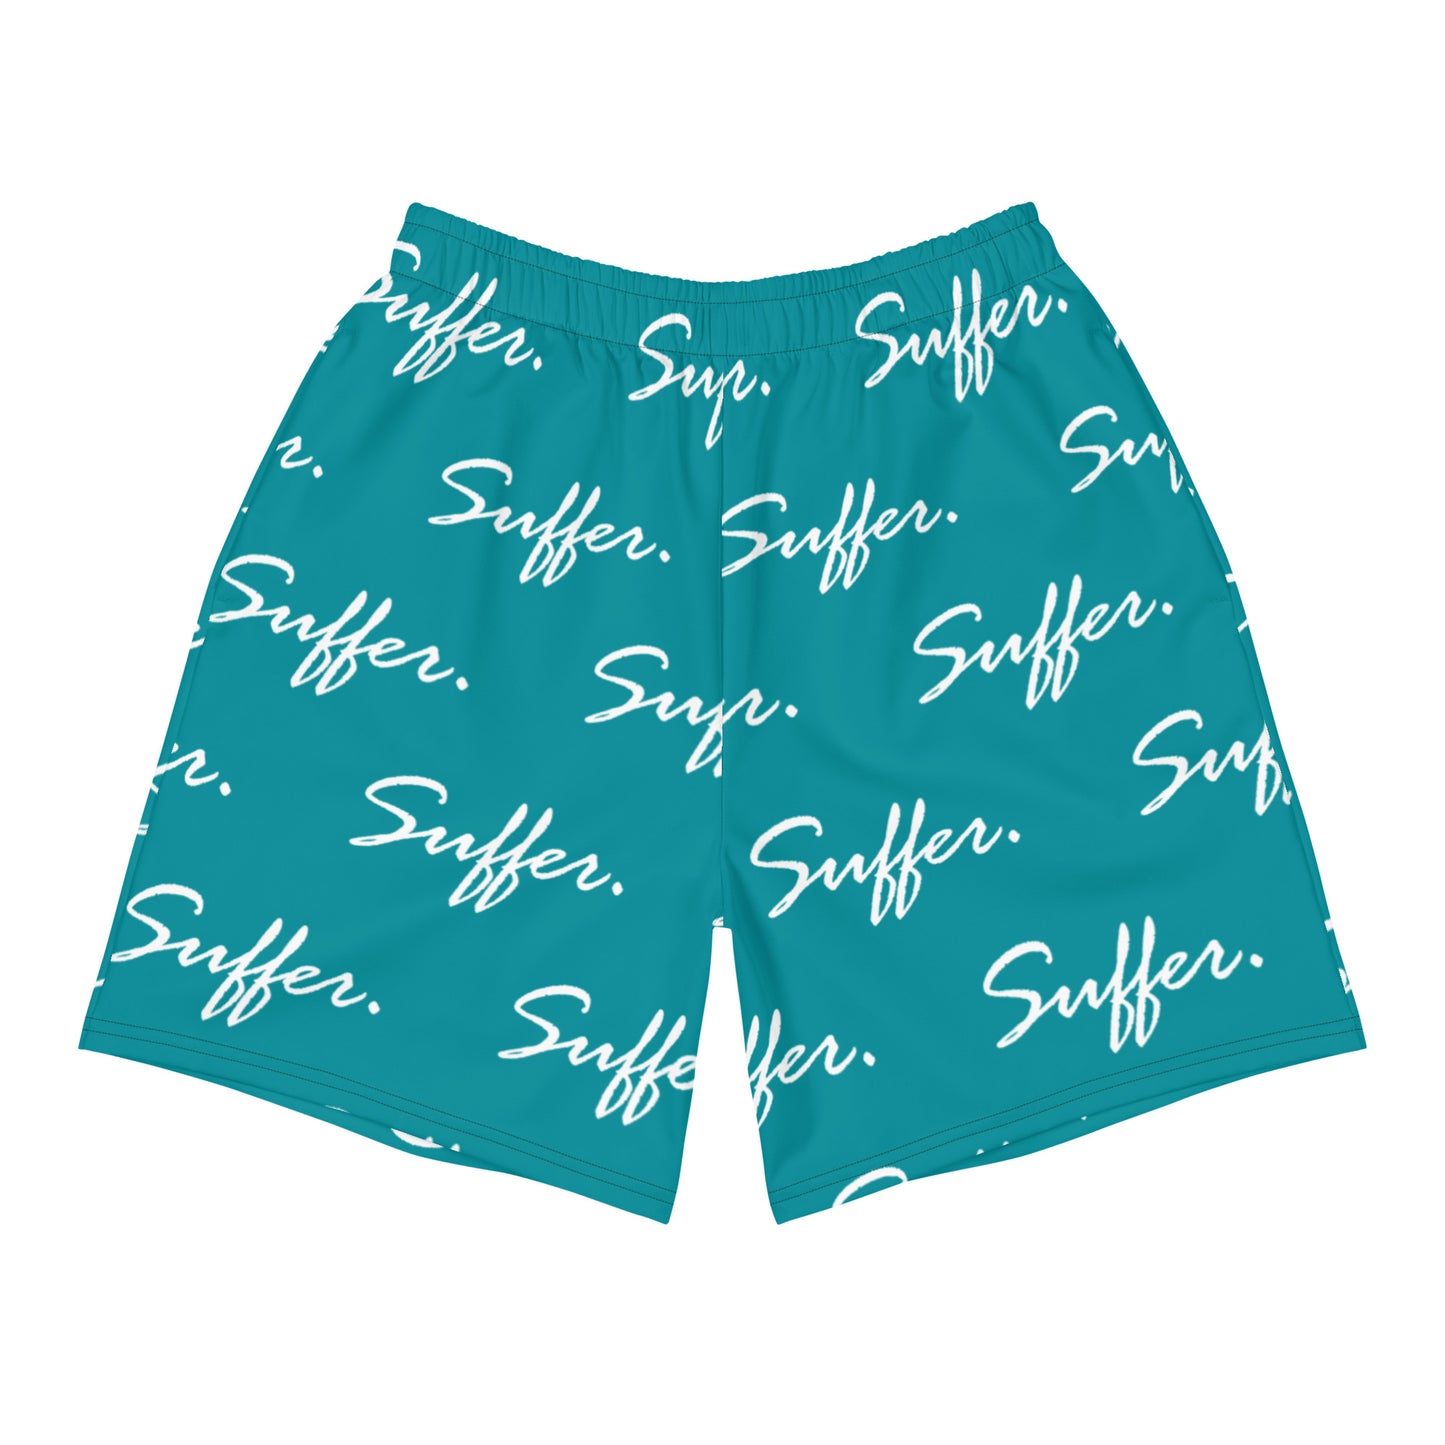 Teal Suffer SigPat Athletic Shorts